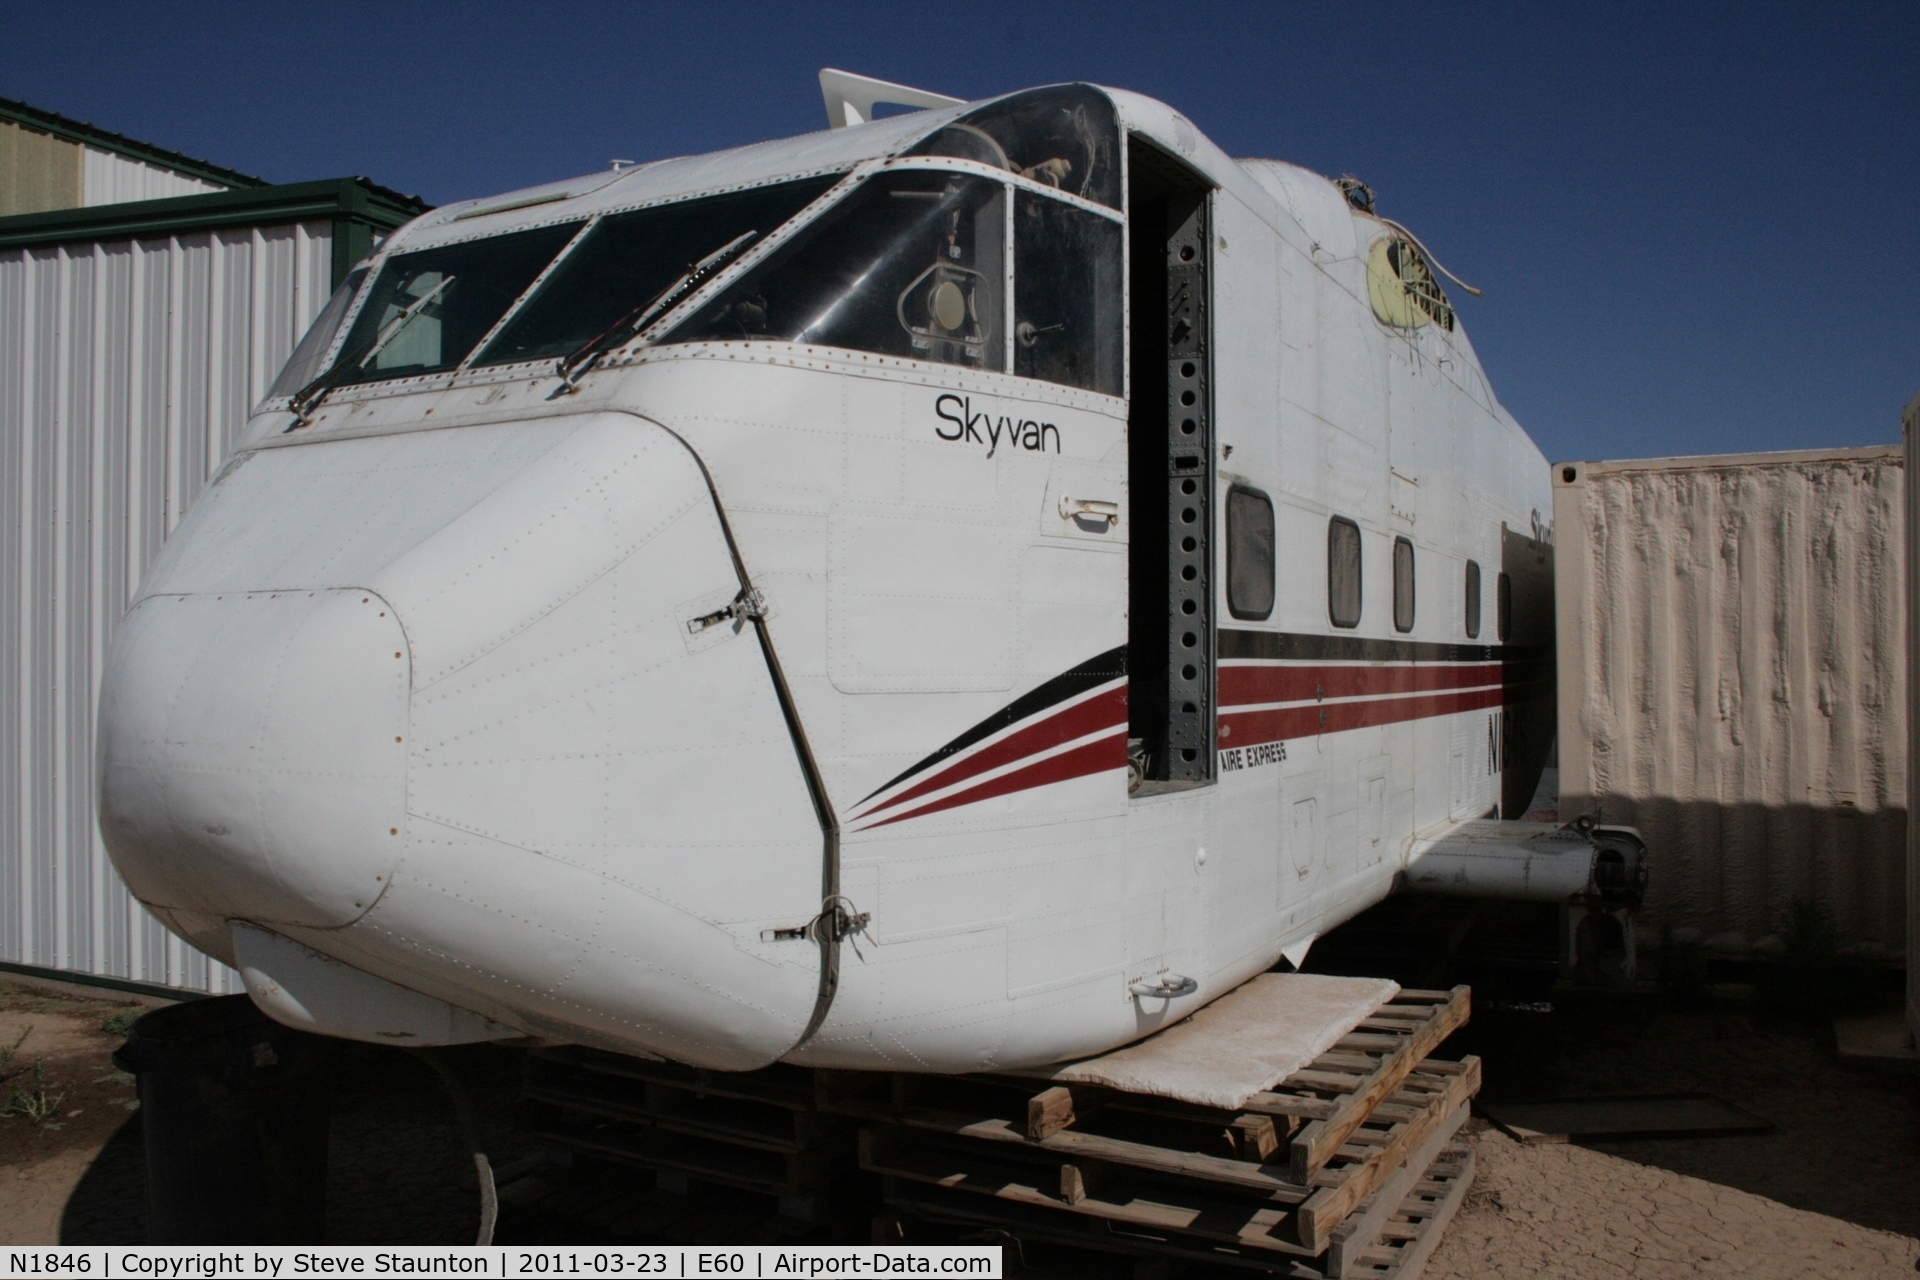 N1846, 1968 Short SC-7 Skyvan 3 C/N SH1846, Taken at Eloy Airport, in March 2011 whilst on an Aeroprint Aviation tour